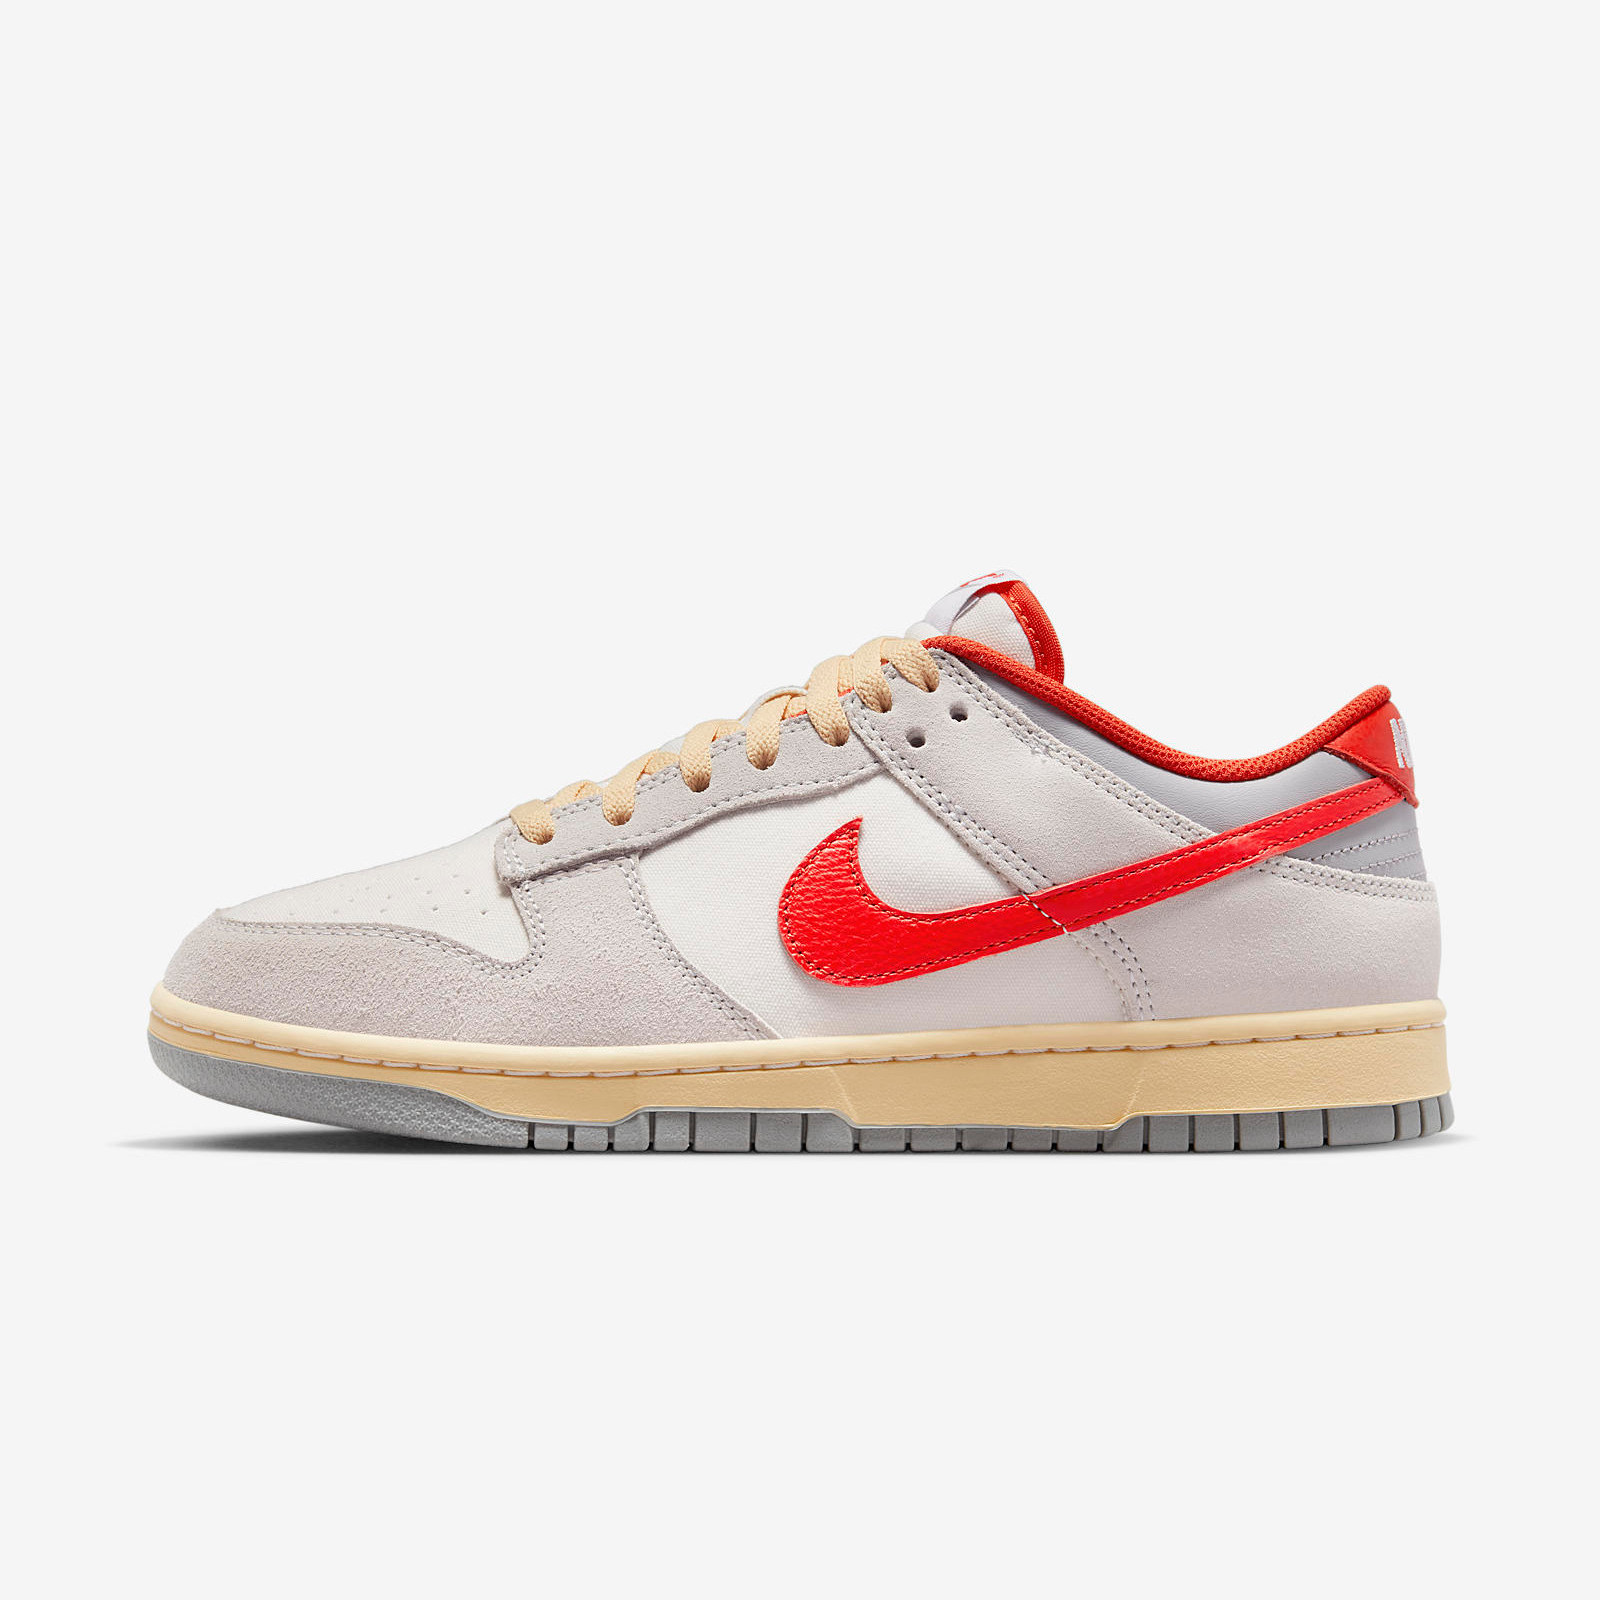 Nike Dunk Low
Sail / Picante Red